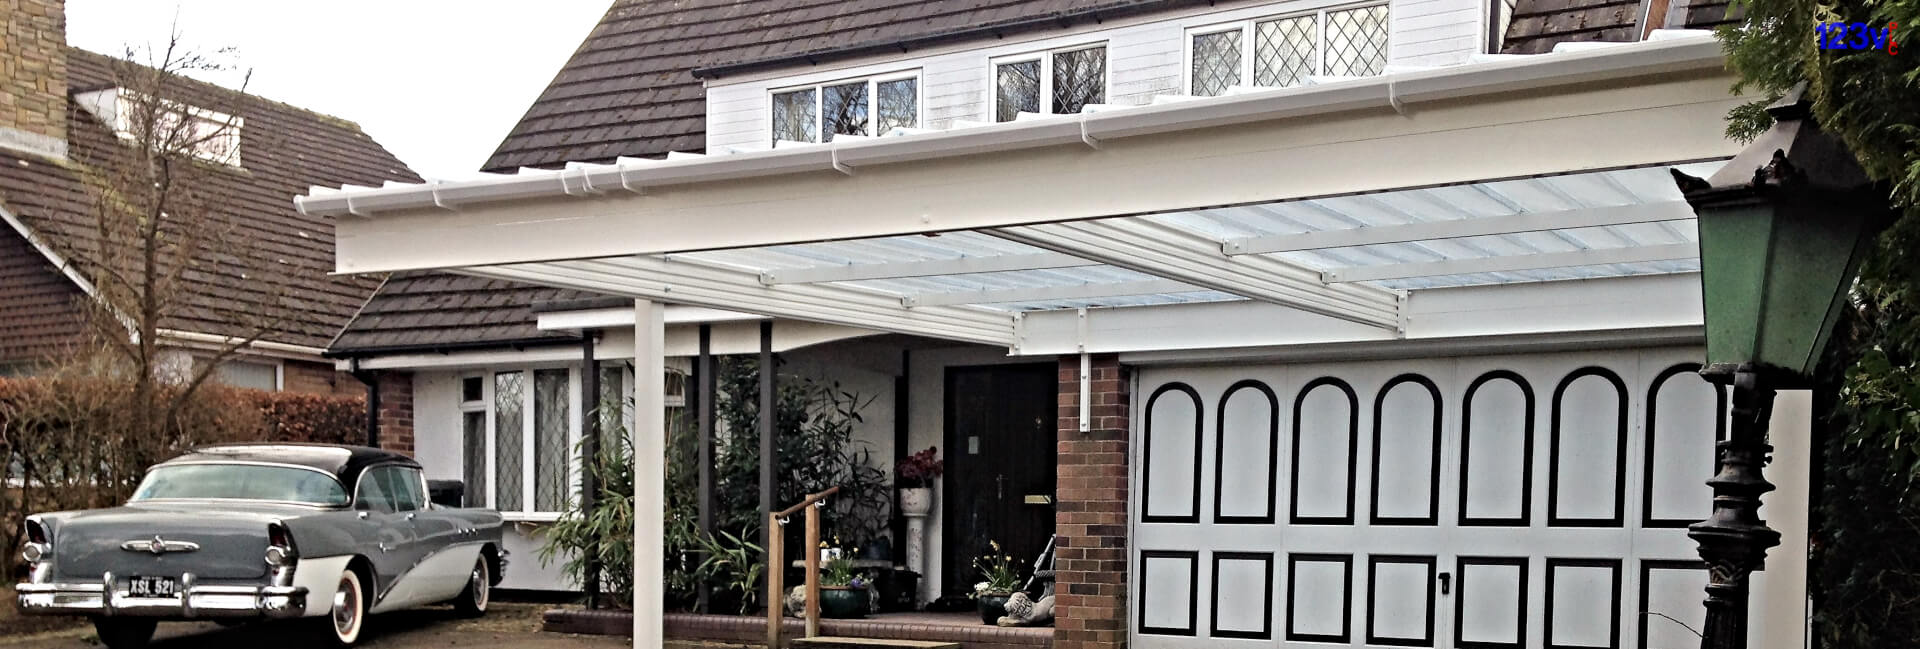 123v Carport Traditional Style for Classic Car